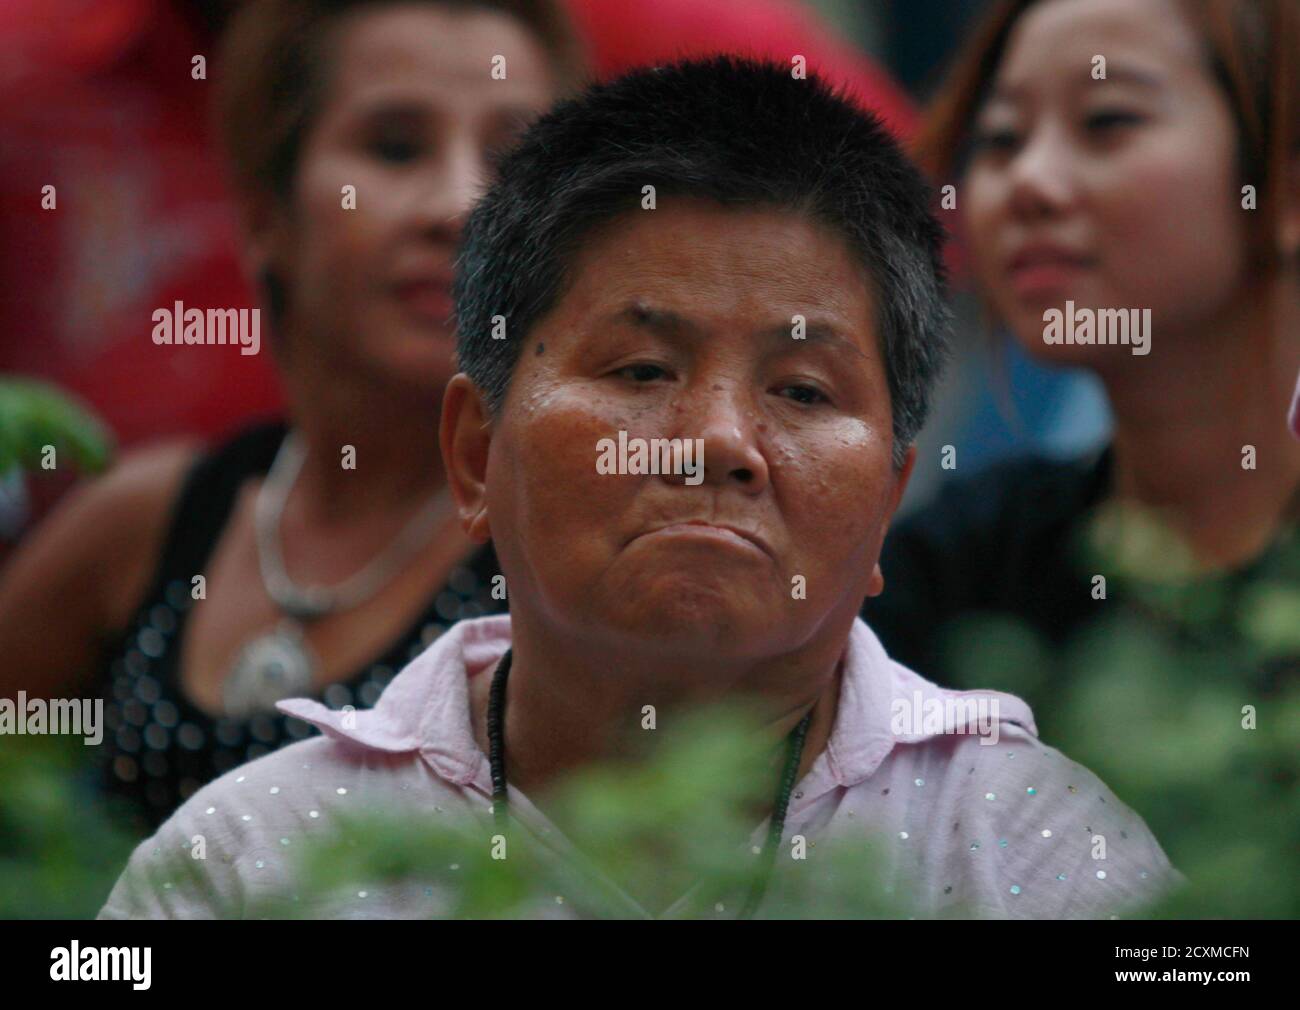 A supporter of the Democrat Party reacts at her party's headquarters after voting in general elections ended in Bangkok July 3, 2011. Thailand's opposition swept to power in a surprise election landslide on Sunday, led by the sister of former Thai prime minister Thaksin Shinawatra in a victory for the rural and urban poor red-shirt protesters who clashed with the army last year. REUTERS/Chaiwat Subprasom   (THAILAND POLITICS - Tags: POLITICS ELECTIONS) Stock Photo